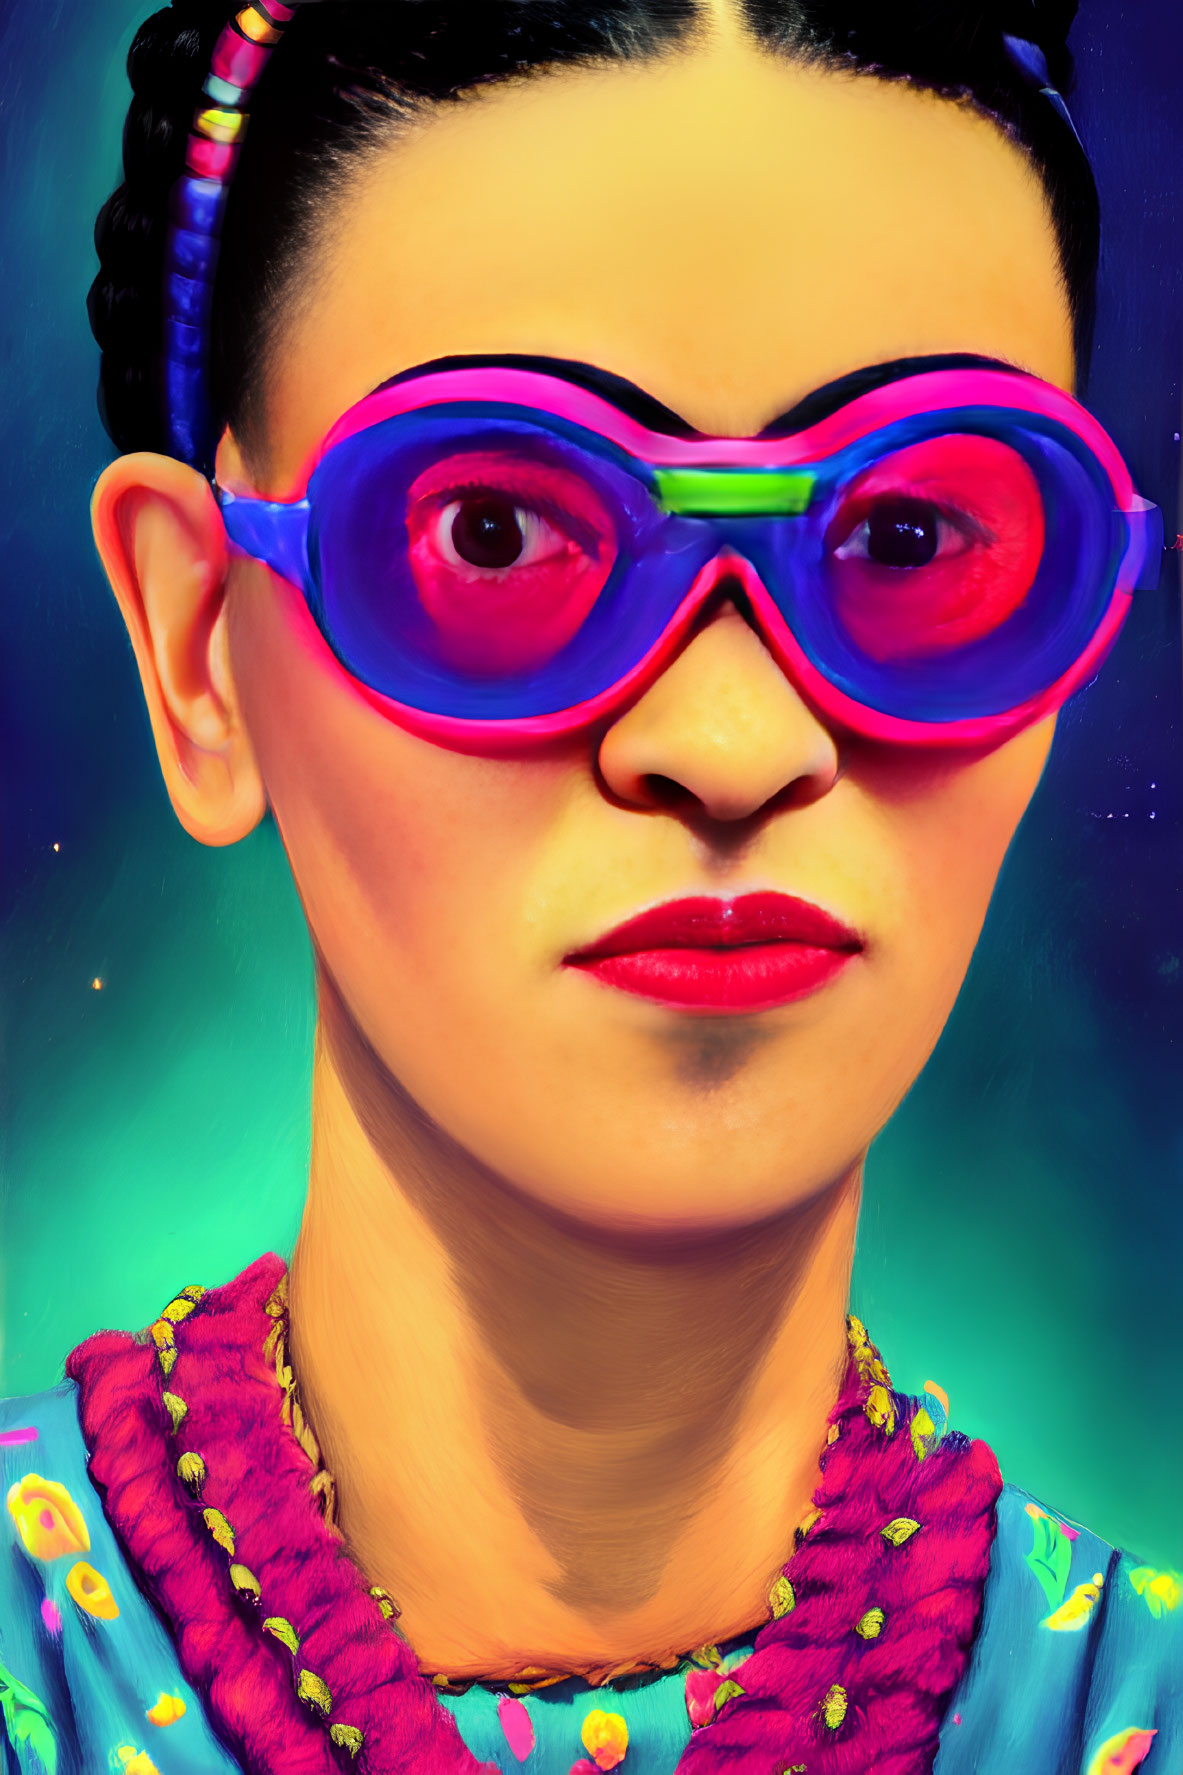 Vibrant portrait featuring pink glasses, braided hair, floral attire, and starlit backdrop